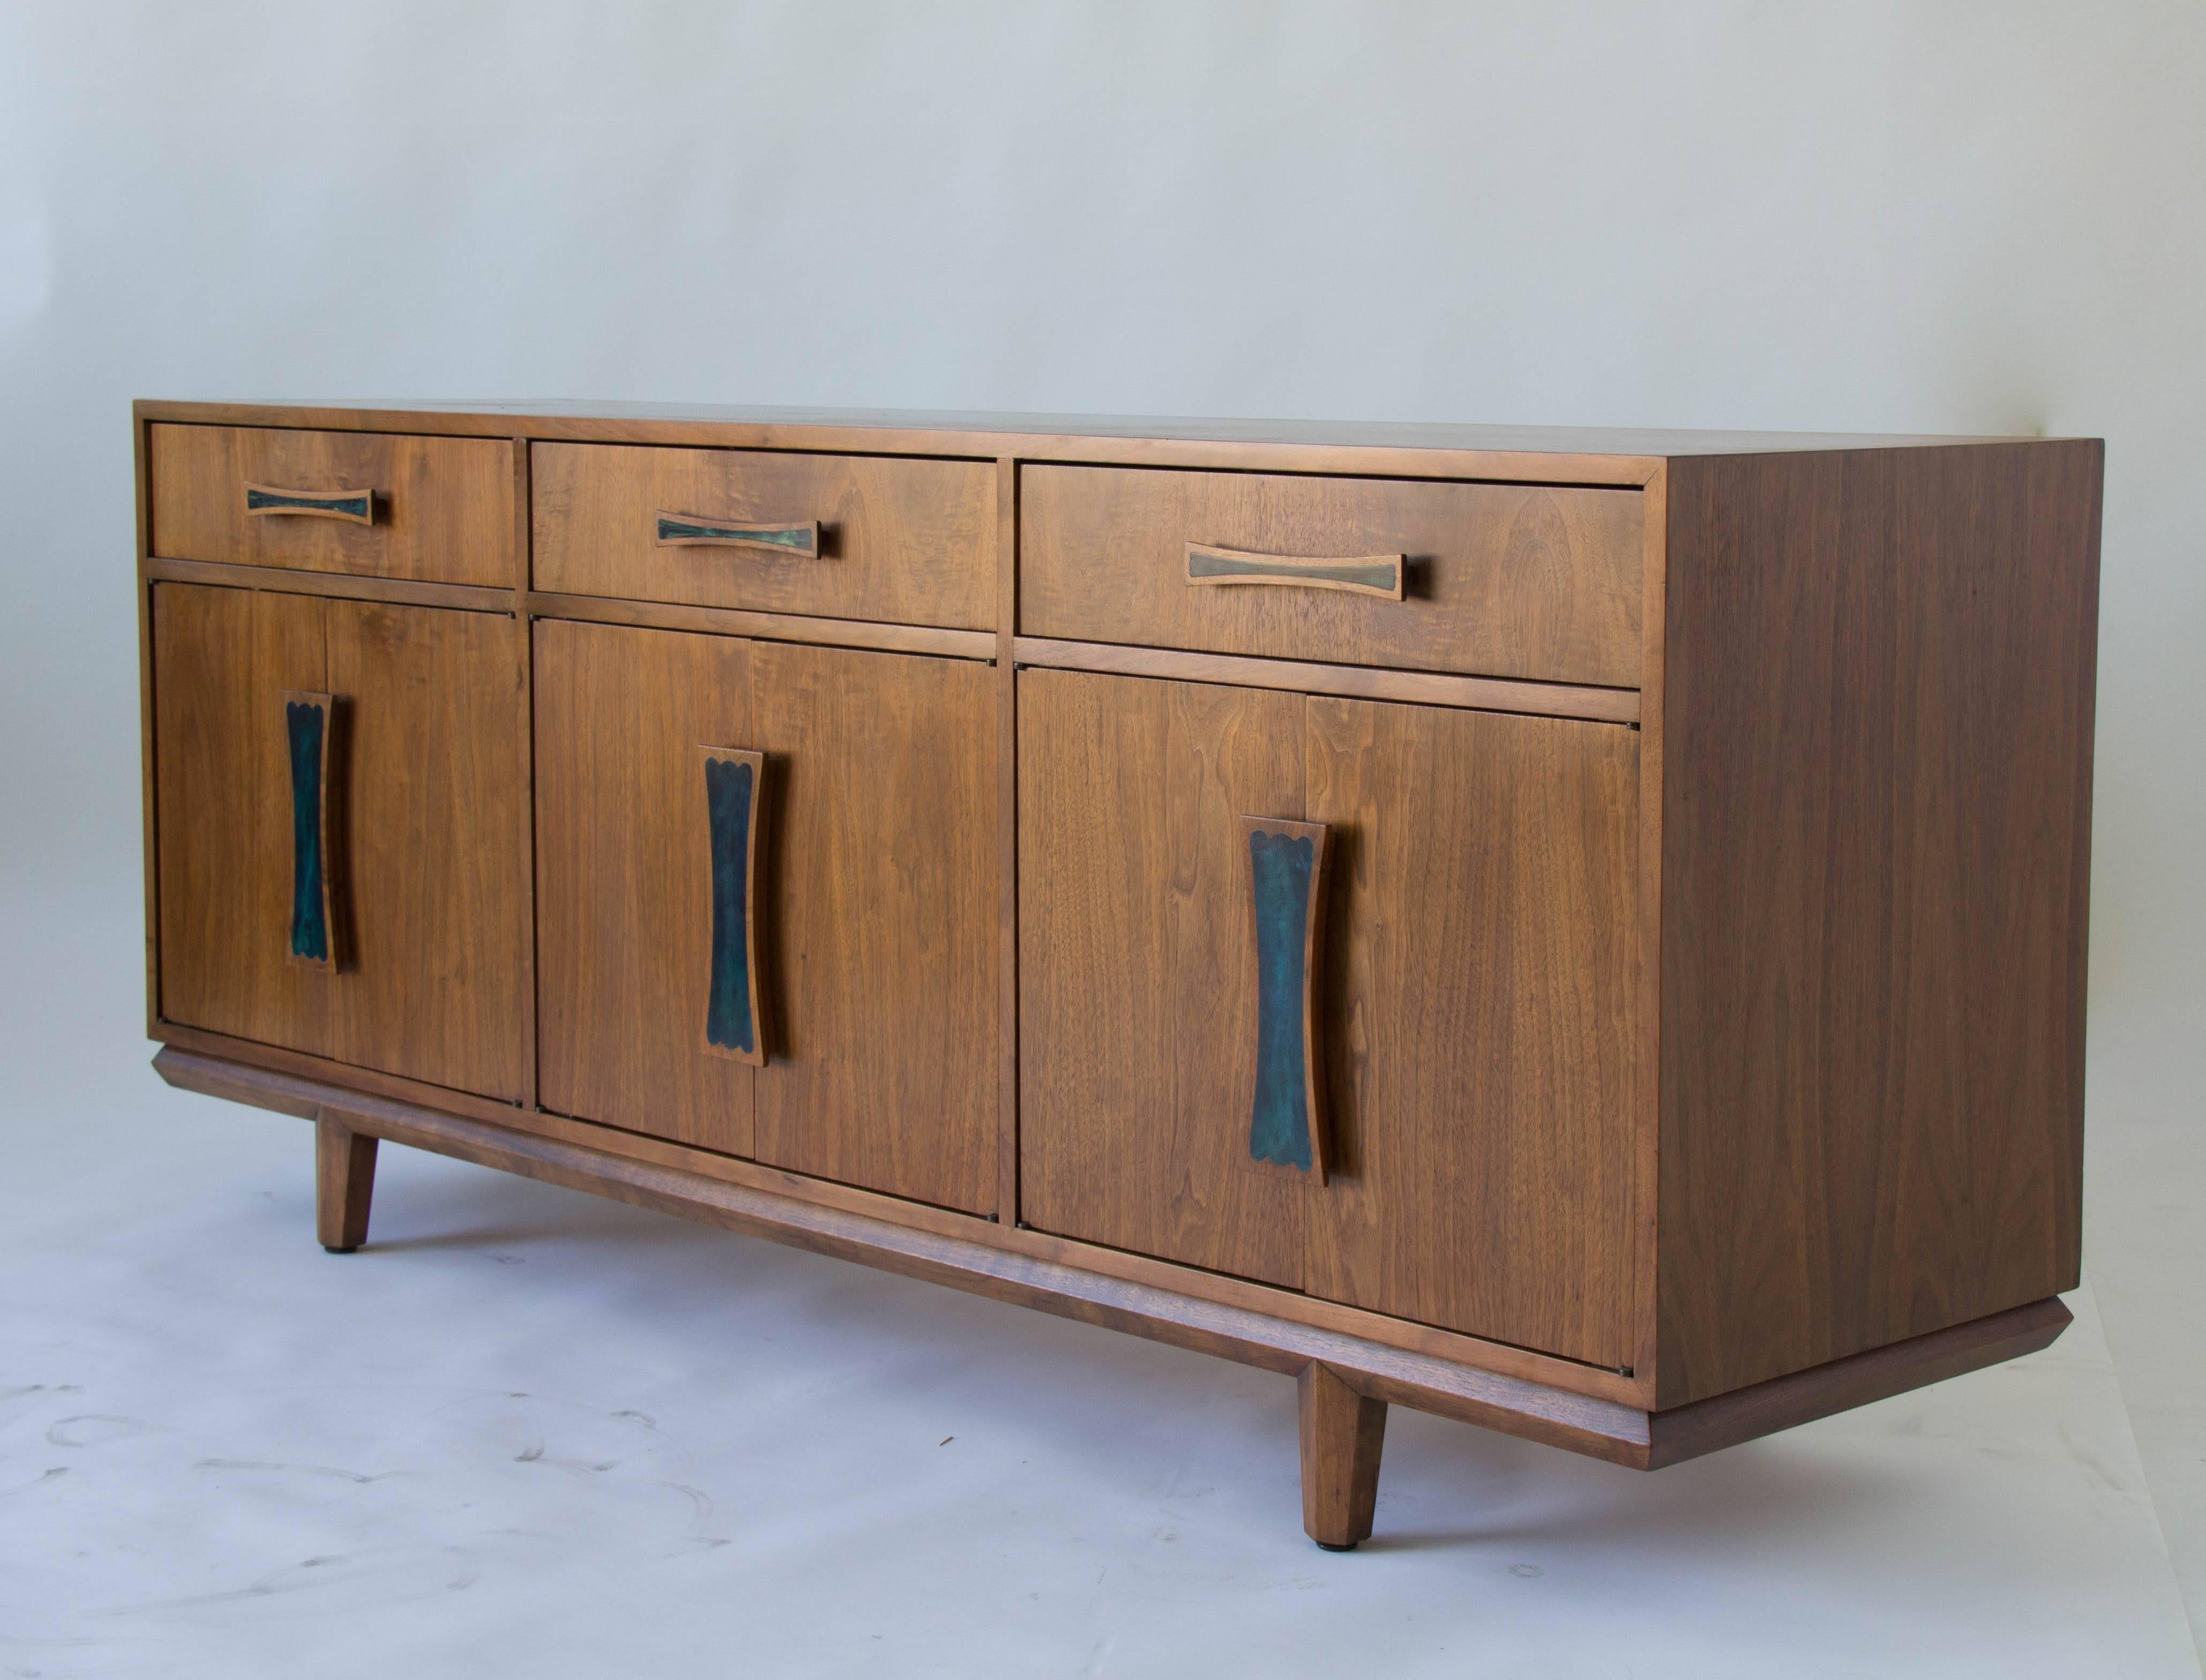 A credenza or sideboard with plenty of storage. This piece by Cal-Mode (subsequently renamed Monteverdi Young) has a walnut case. Each drawer and door is fitted with a sculpted wood handle, inlaid with teal blue resin. Each storage cupboard has an